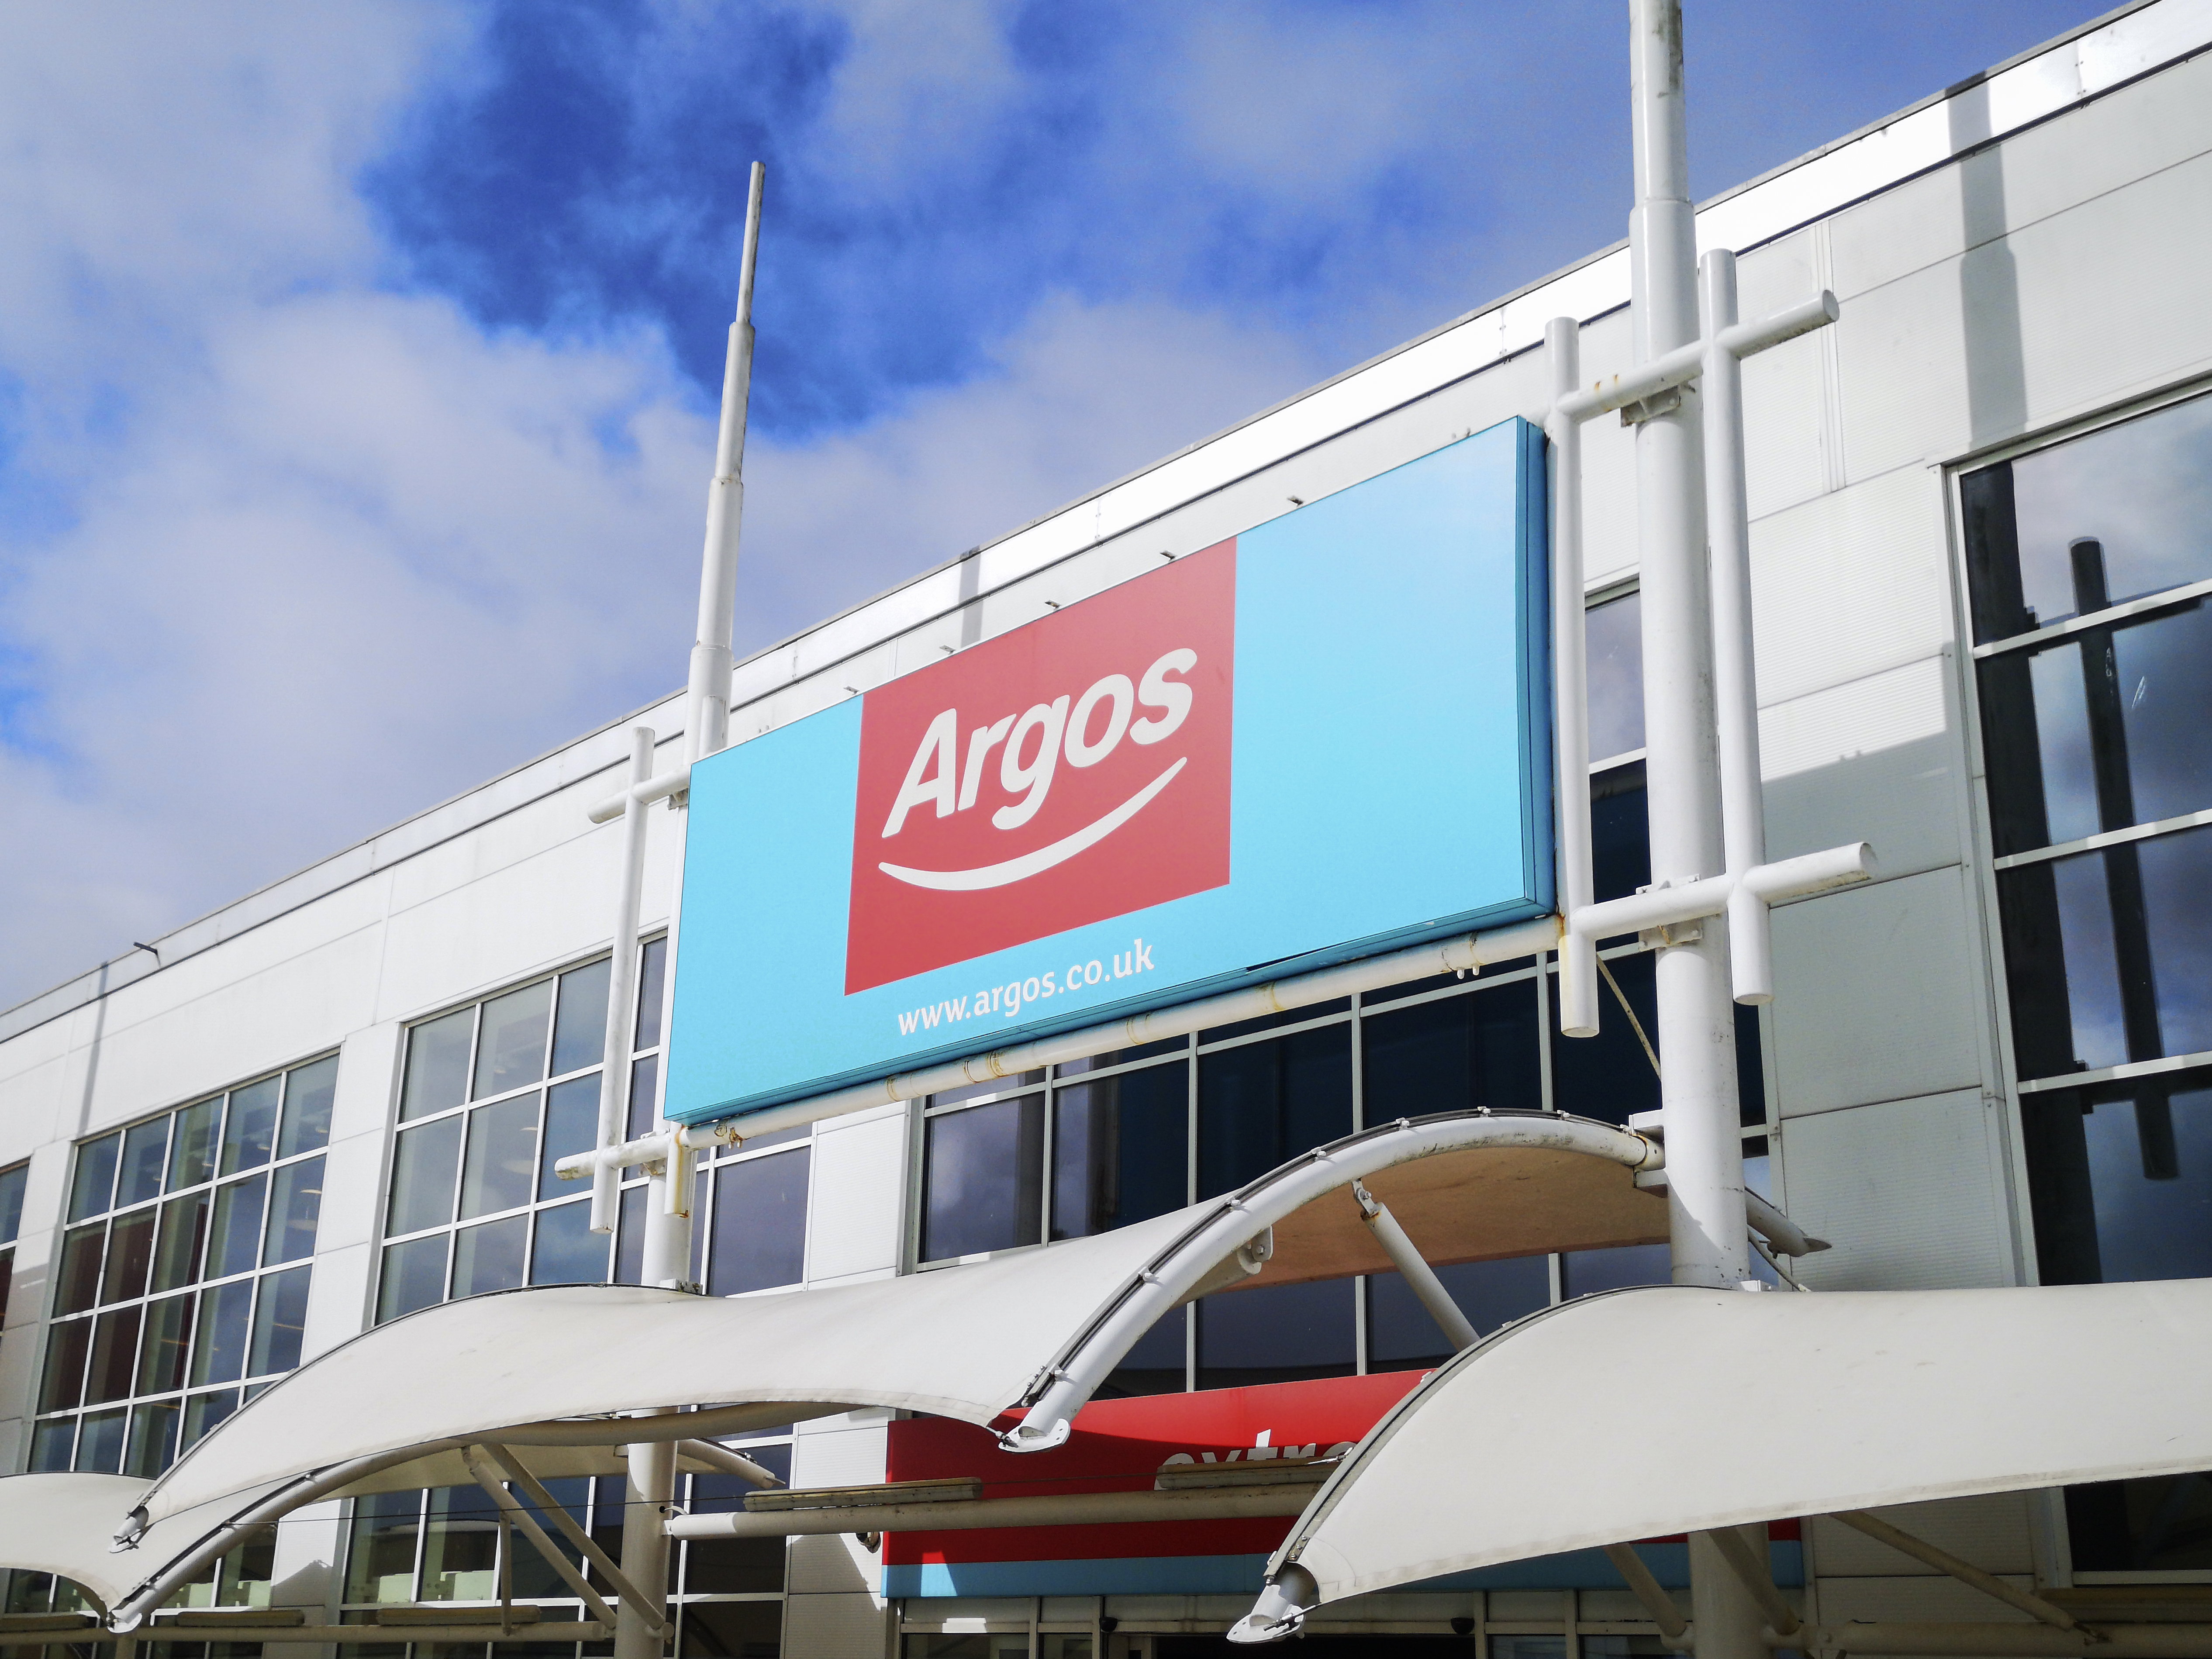 Parents are racing to Argos to snap up